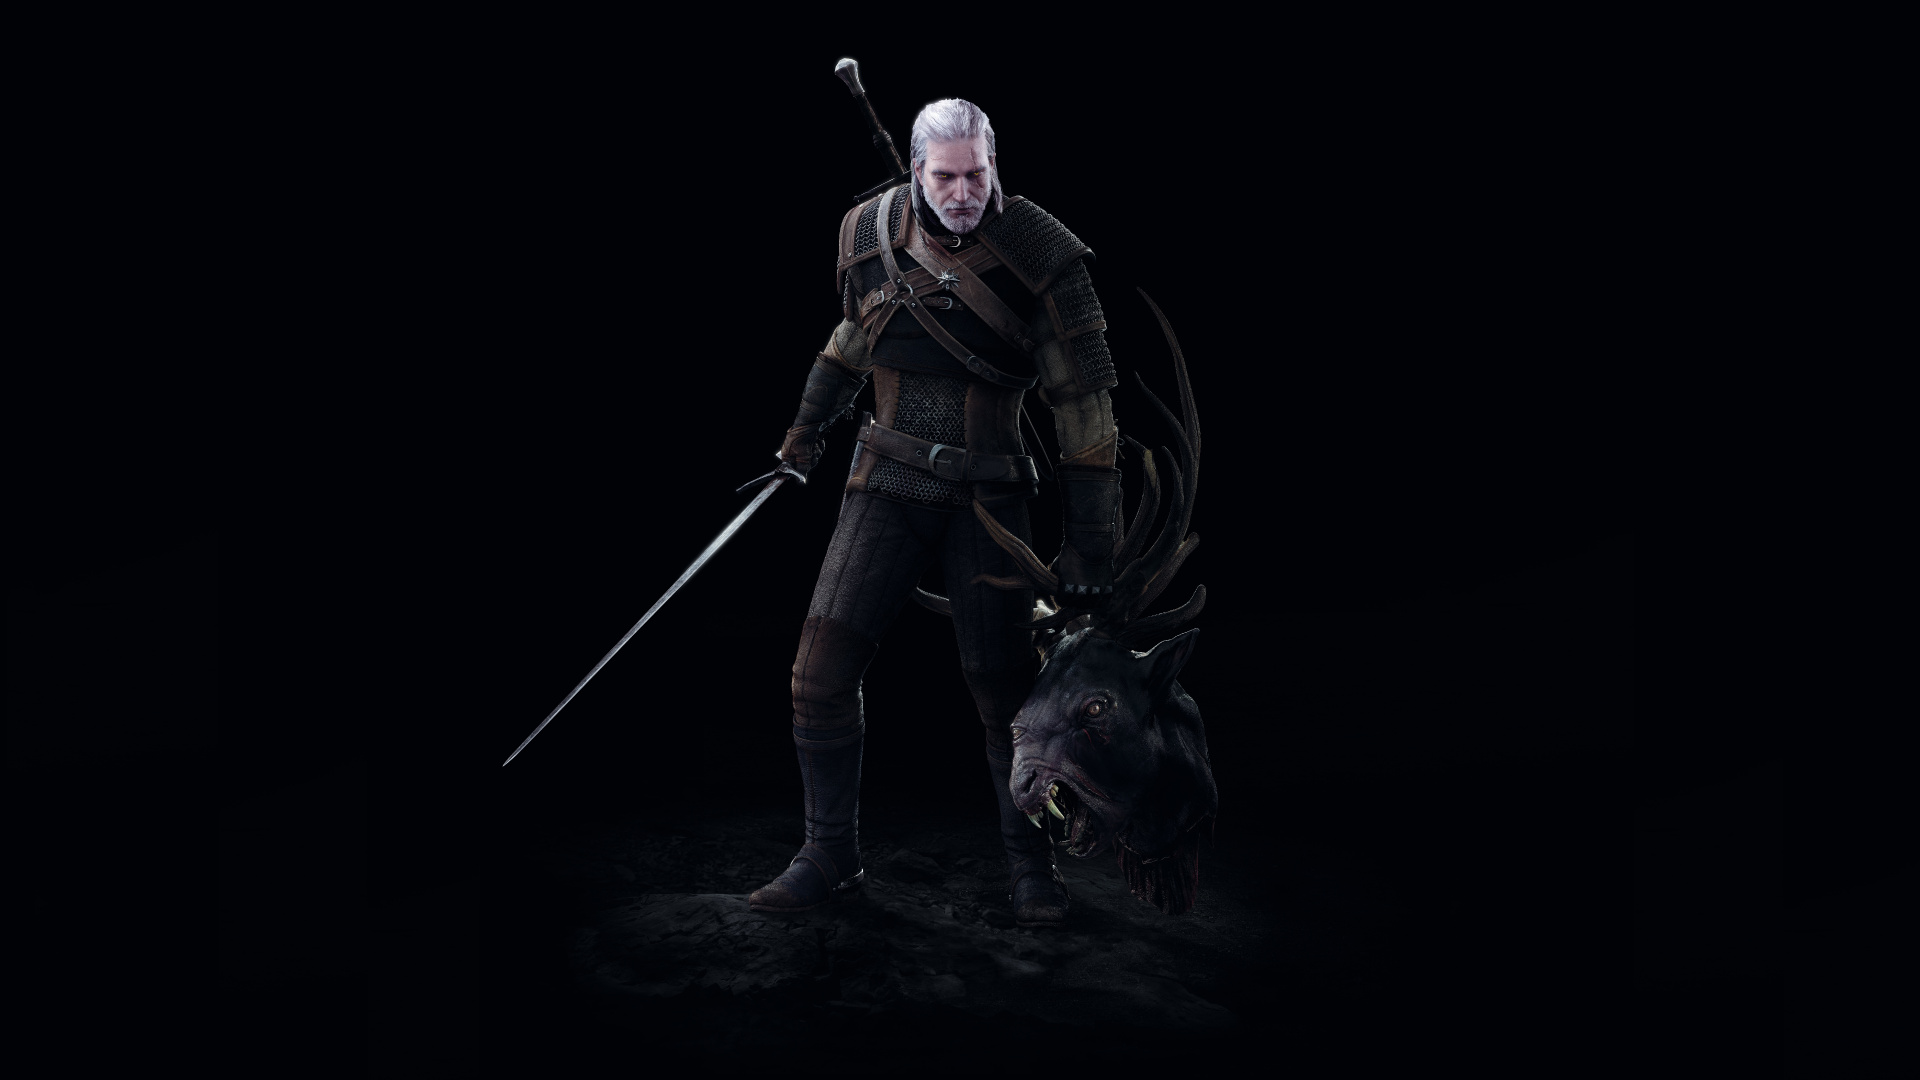 The Witcher 3 Wild Hunt, Geralt of Rivia, Darkness, Action Figure, Outerwear. Wallpaper in 1920x1080 Resolution